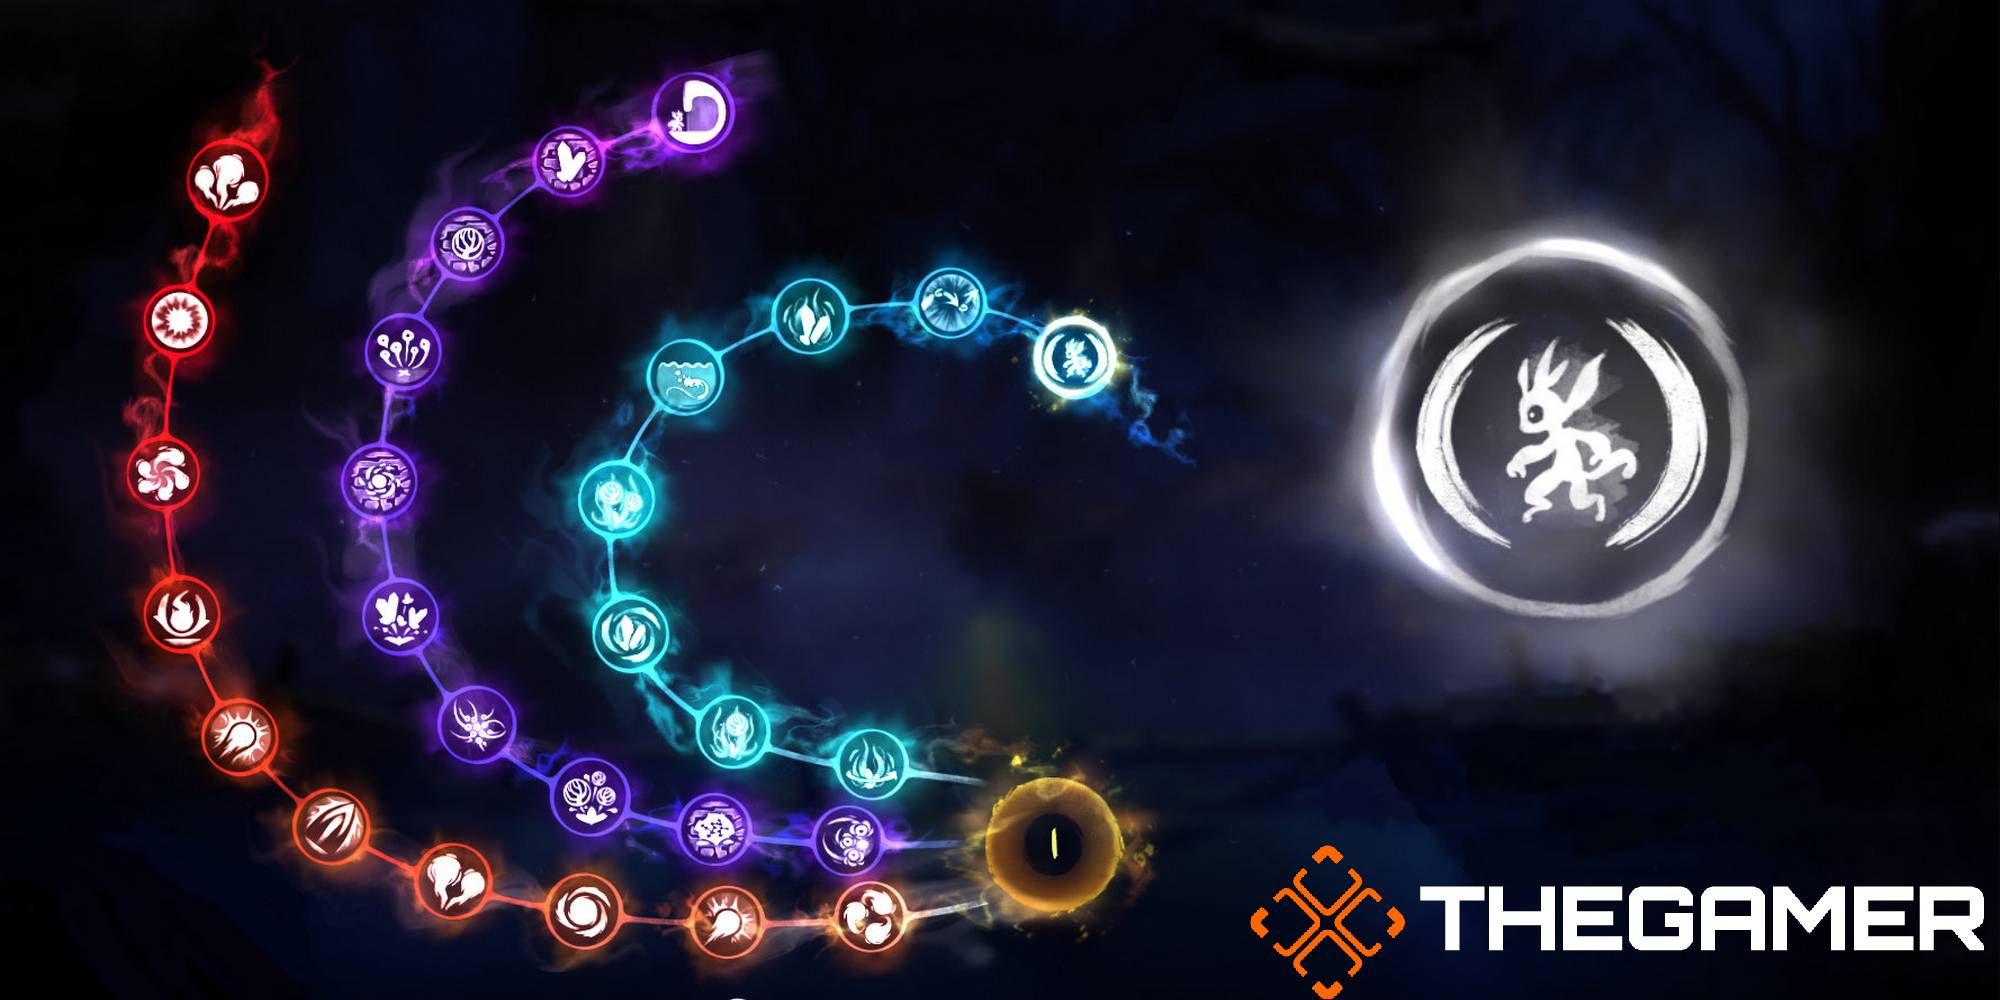 Ori and the Blind Forest filled out  skill tree with thegamer logo in the bottom corner